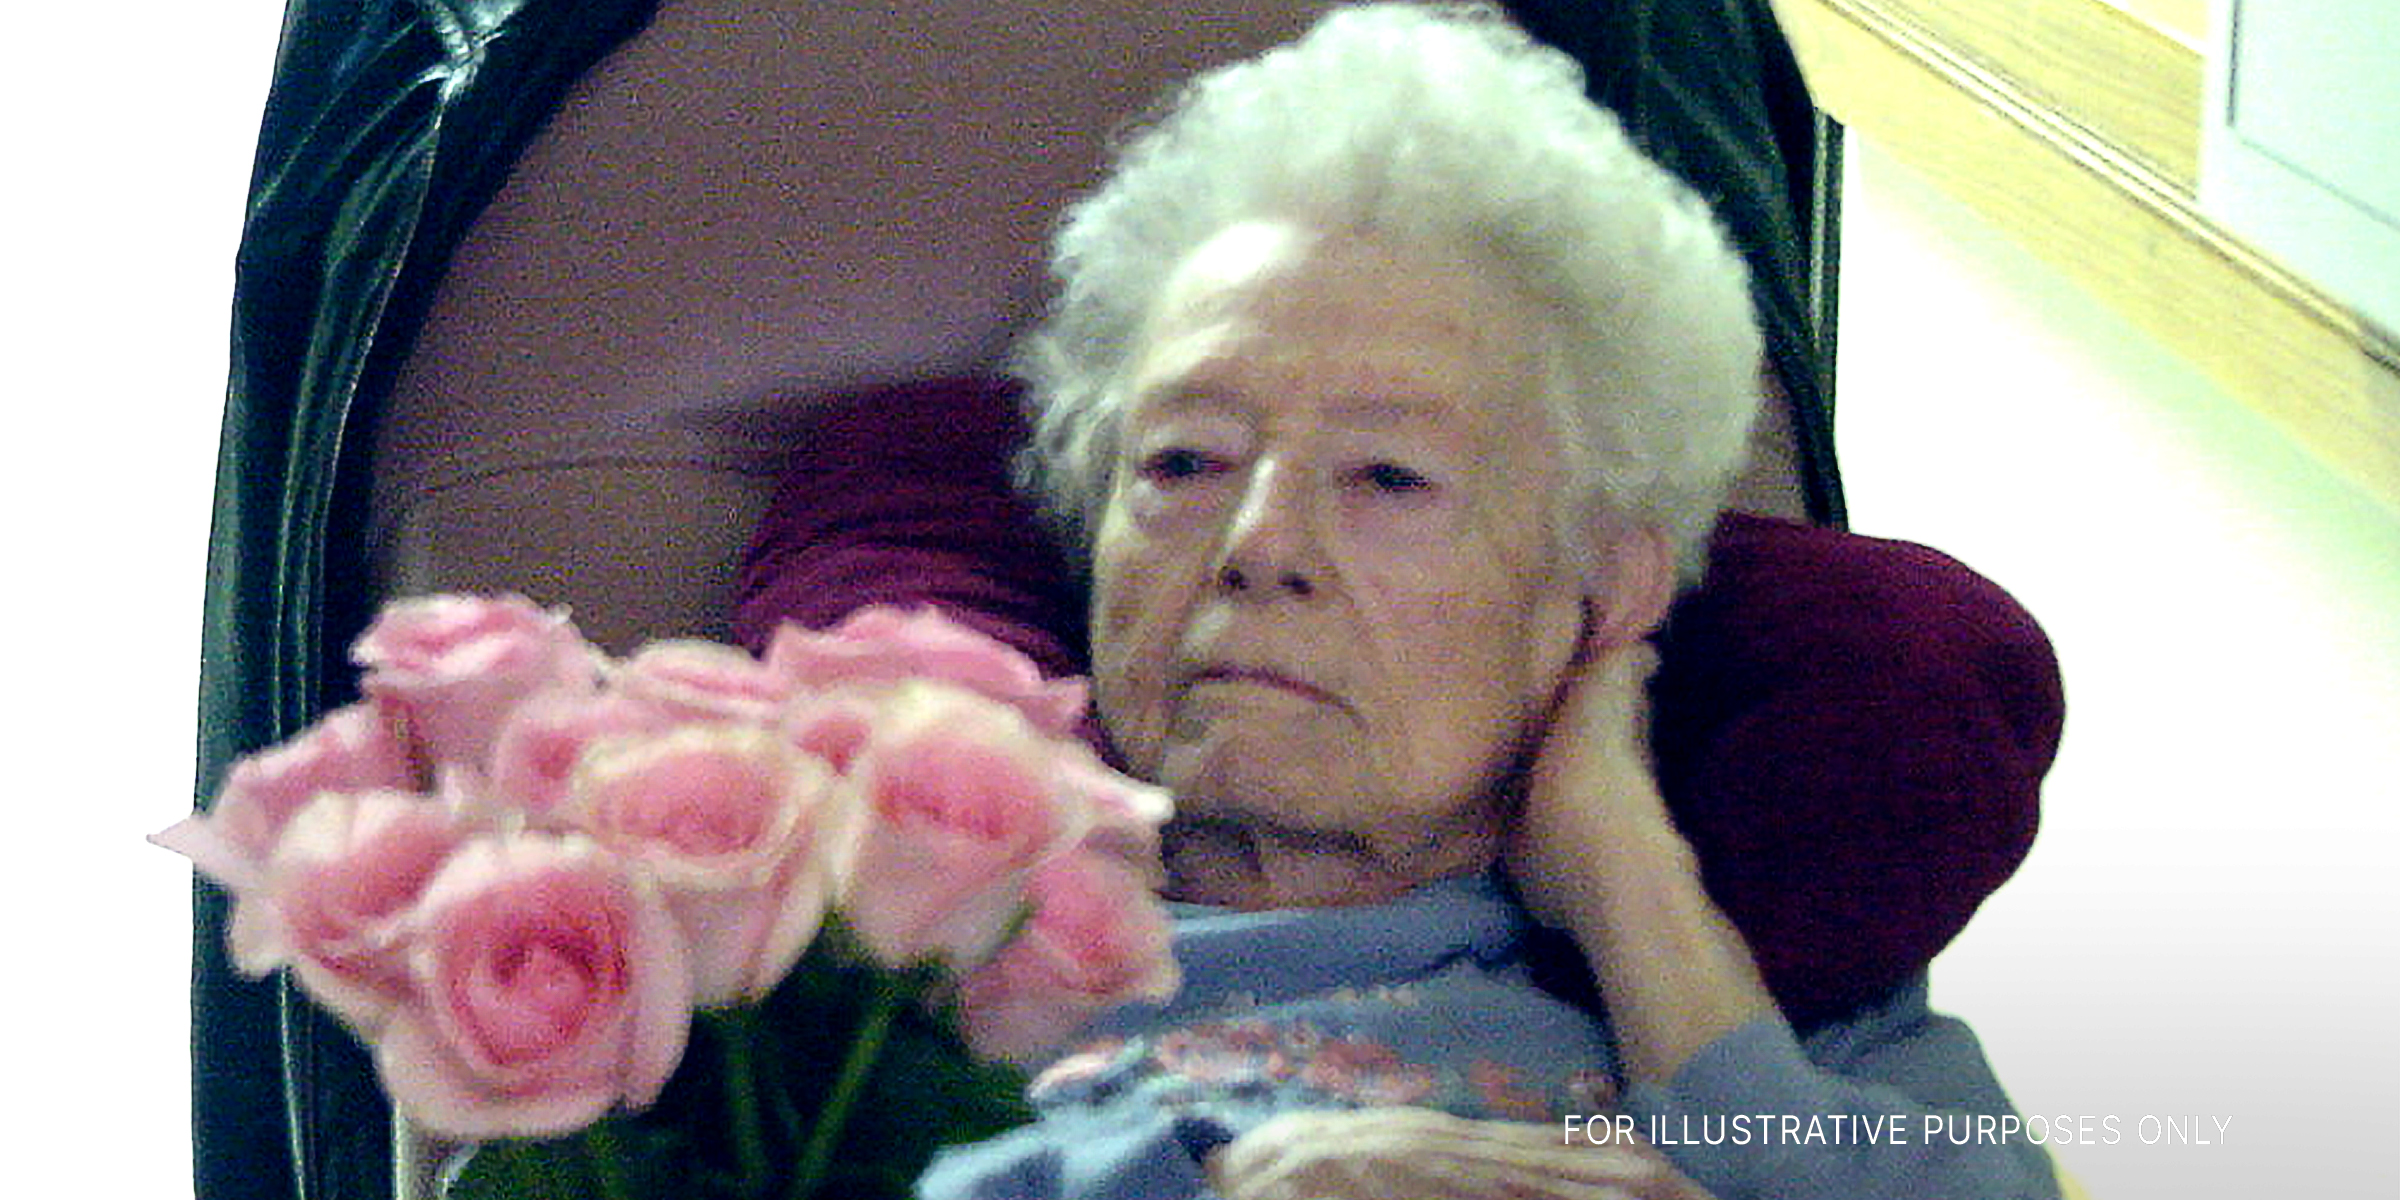 An old woman holding roses | Source: lick,com/maotx/CC BY-SA 2.0